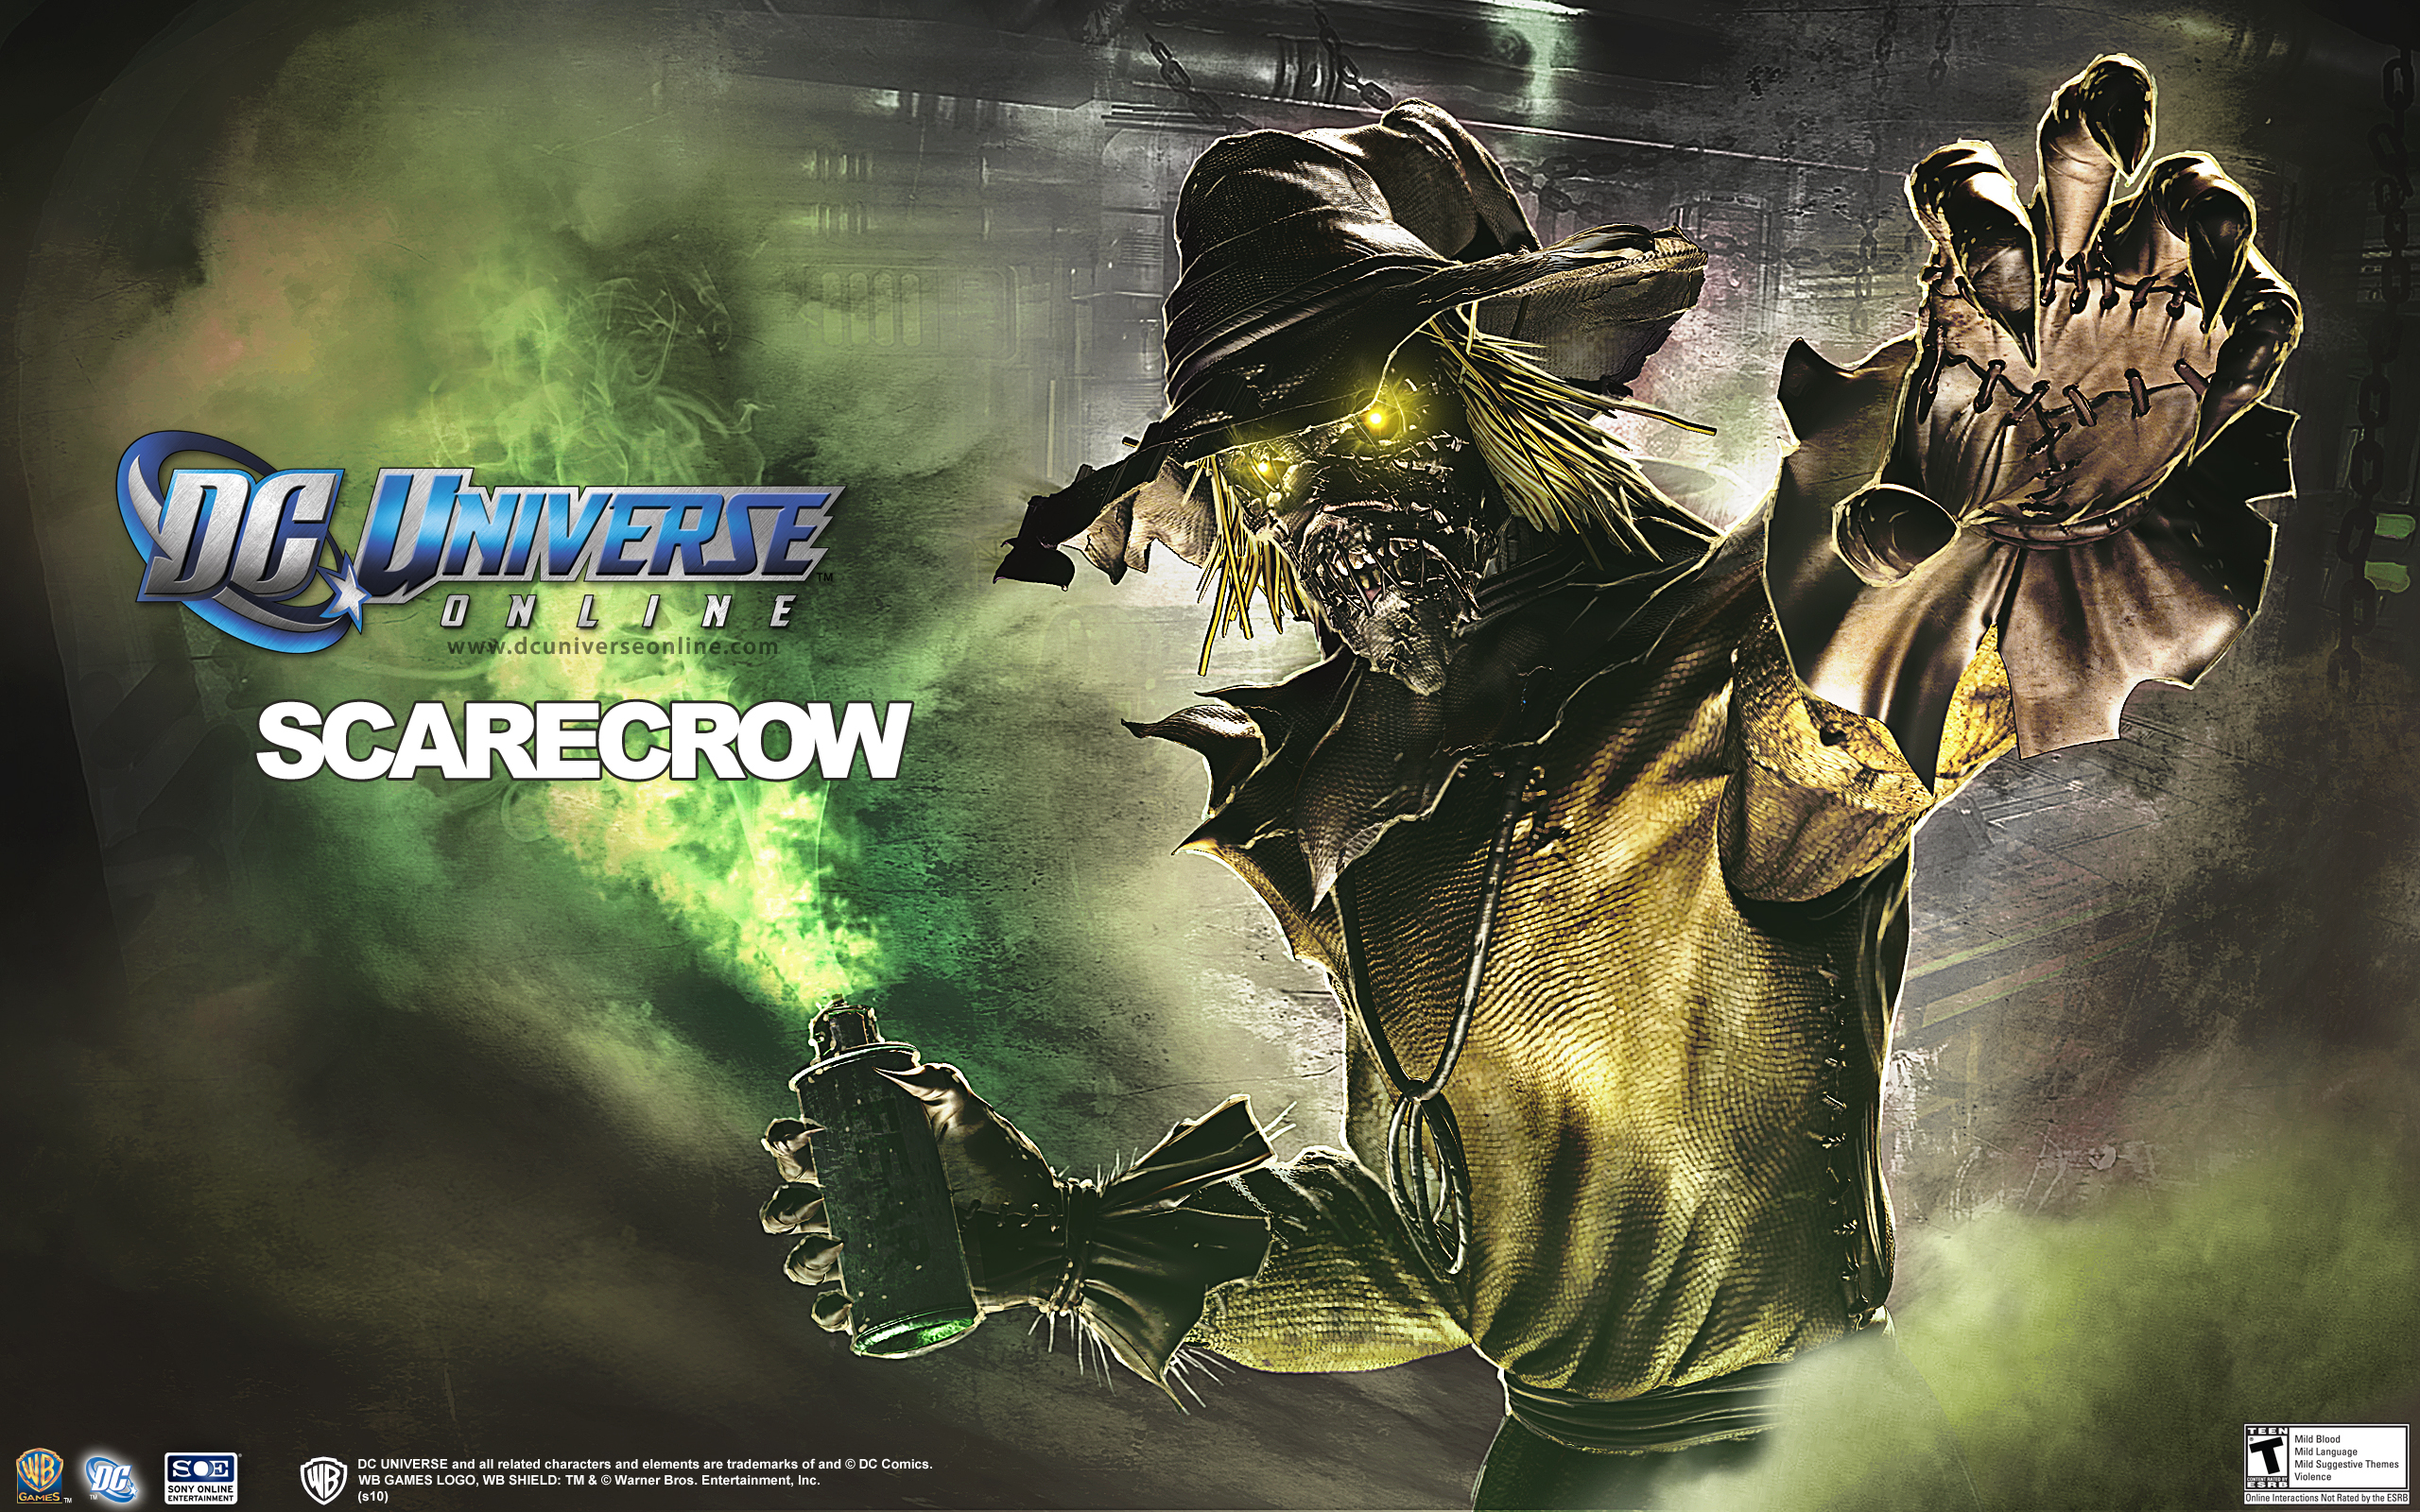 A menacing Scarecrow from Batman stands tall in this HD desktop wallpaper.